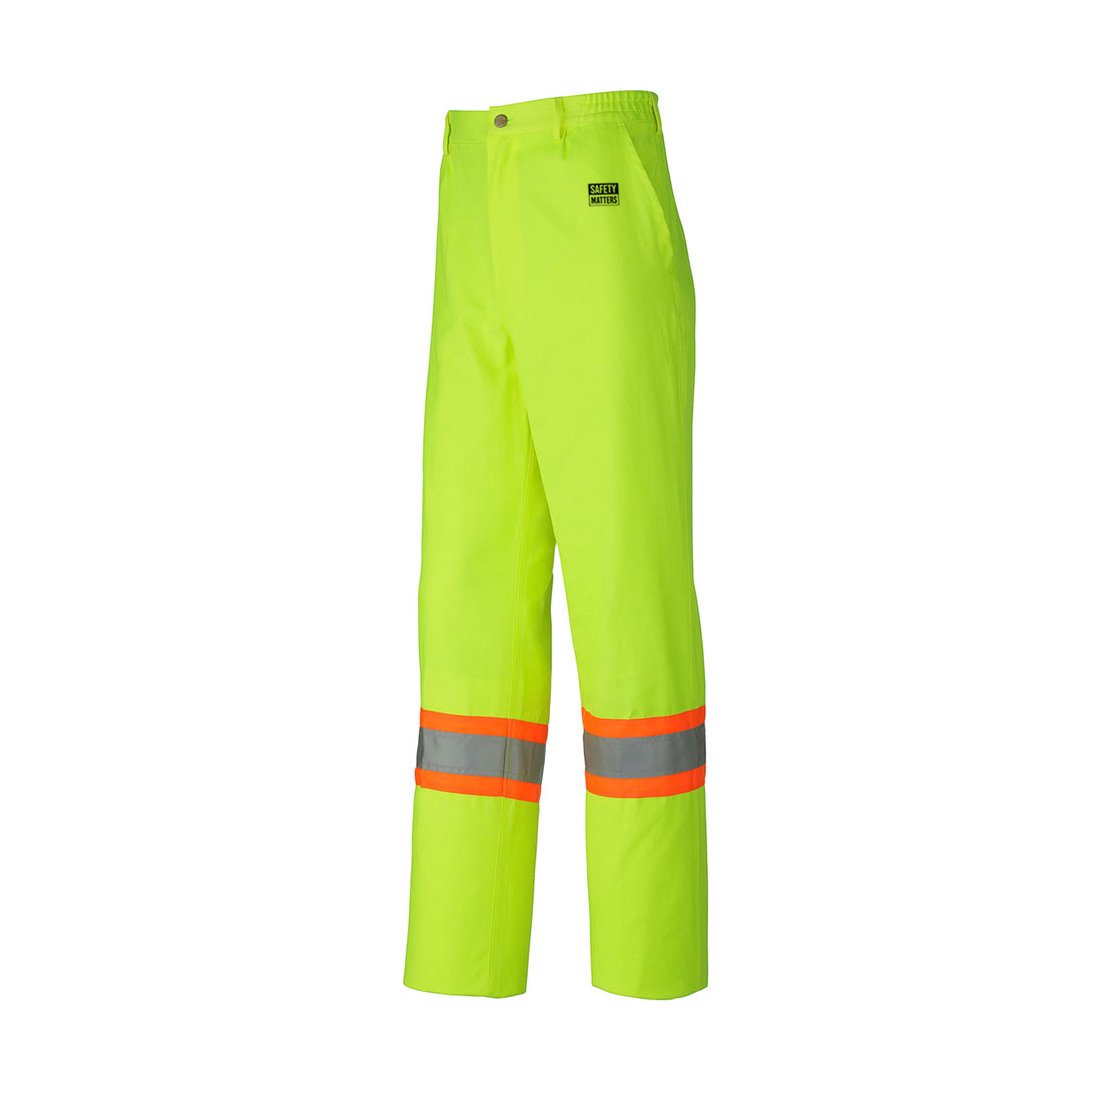 Yellow Hi Vis Safety Pant Poly Cotton Fabric with Reflectors